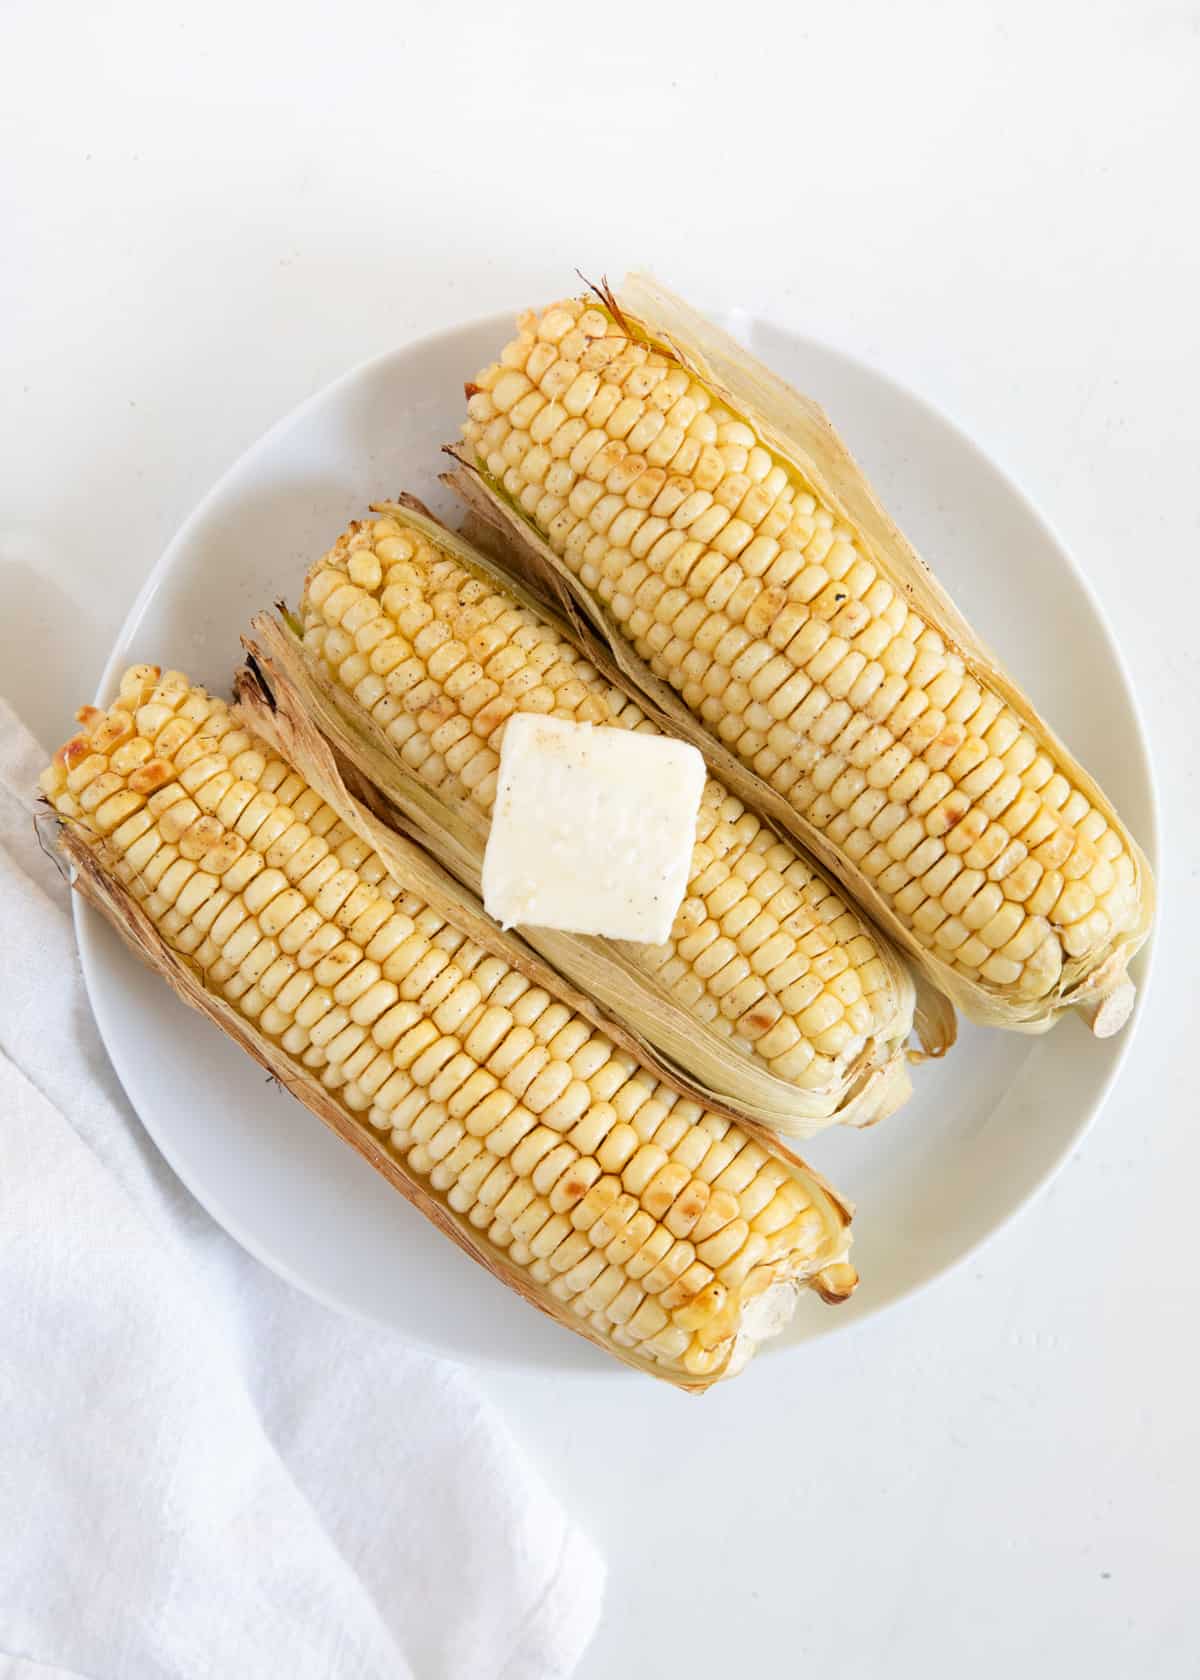 Grilled corn on white plate.